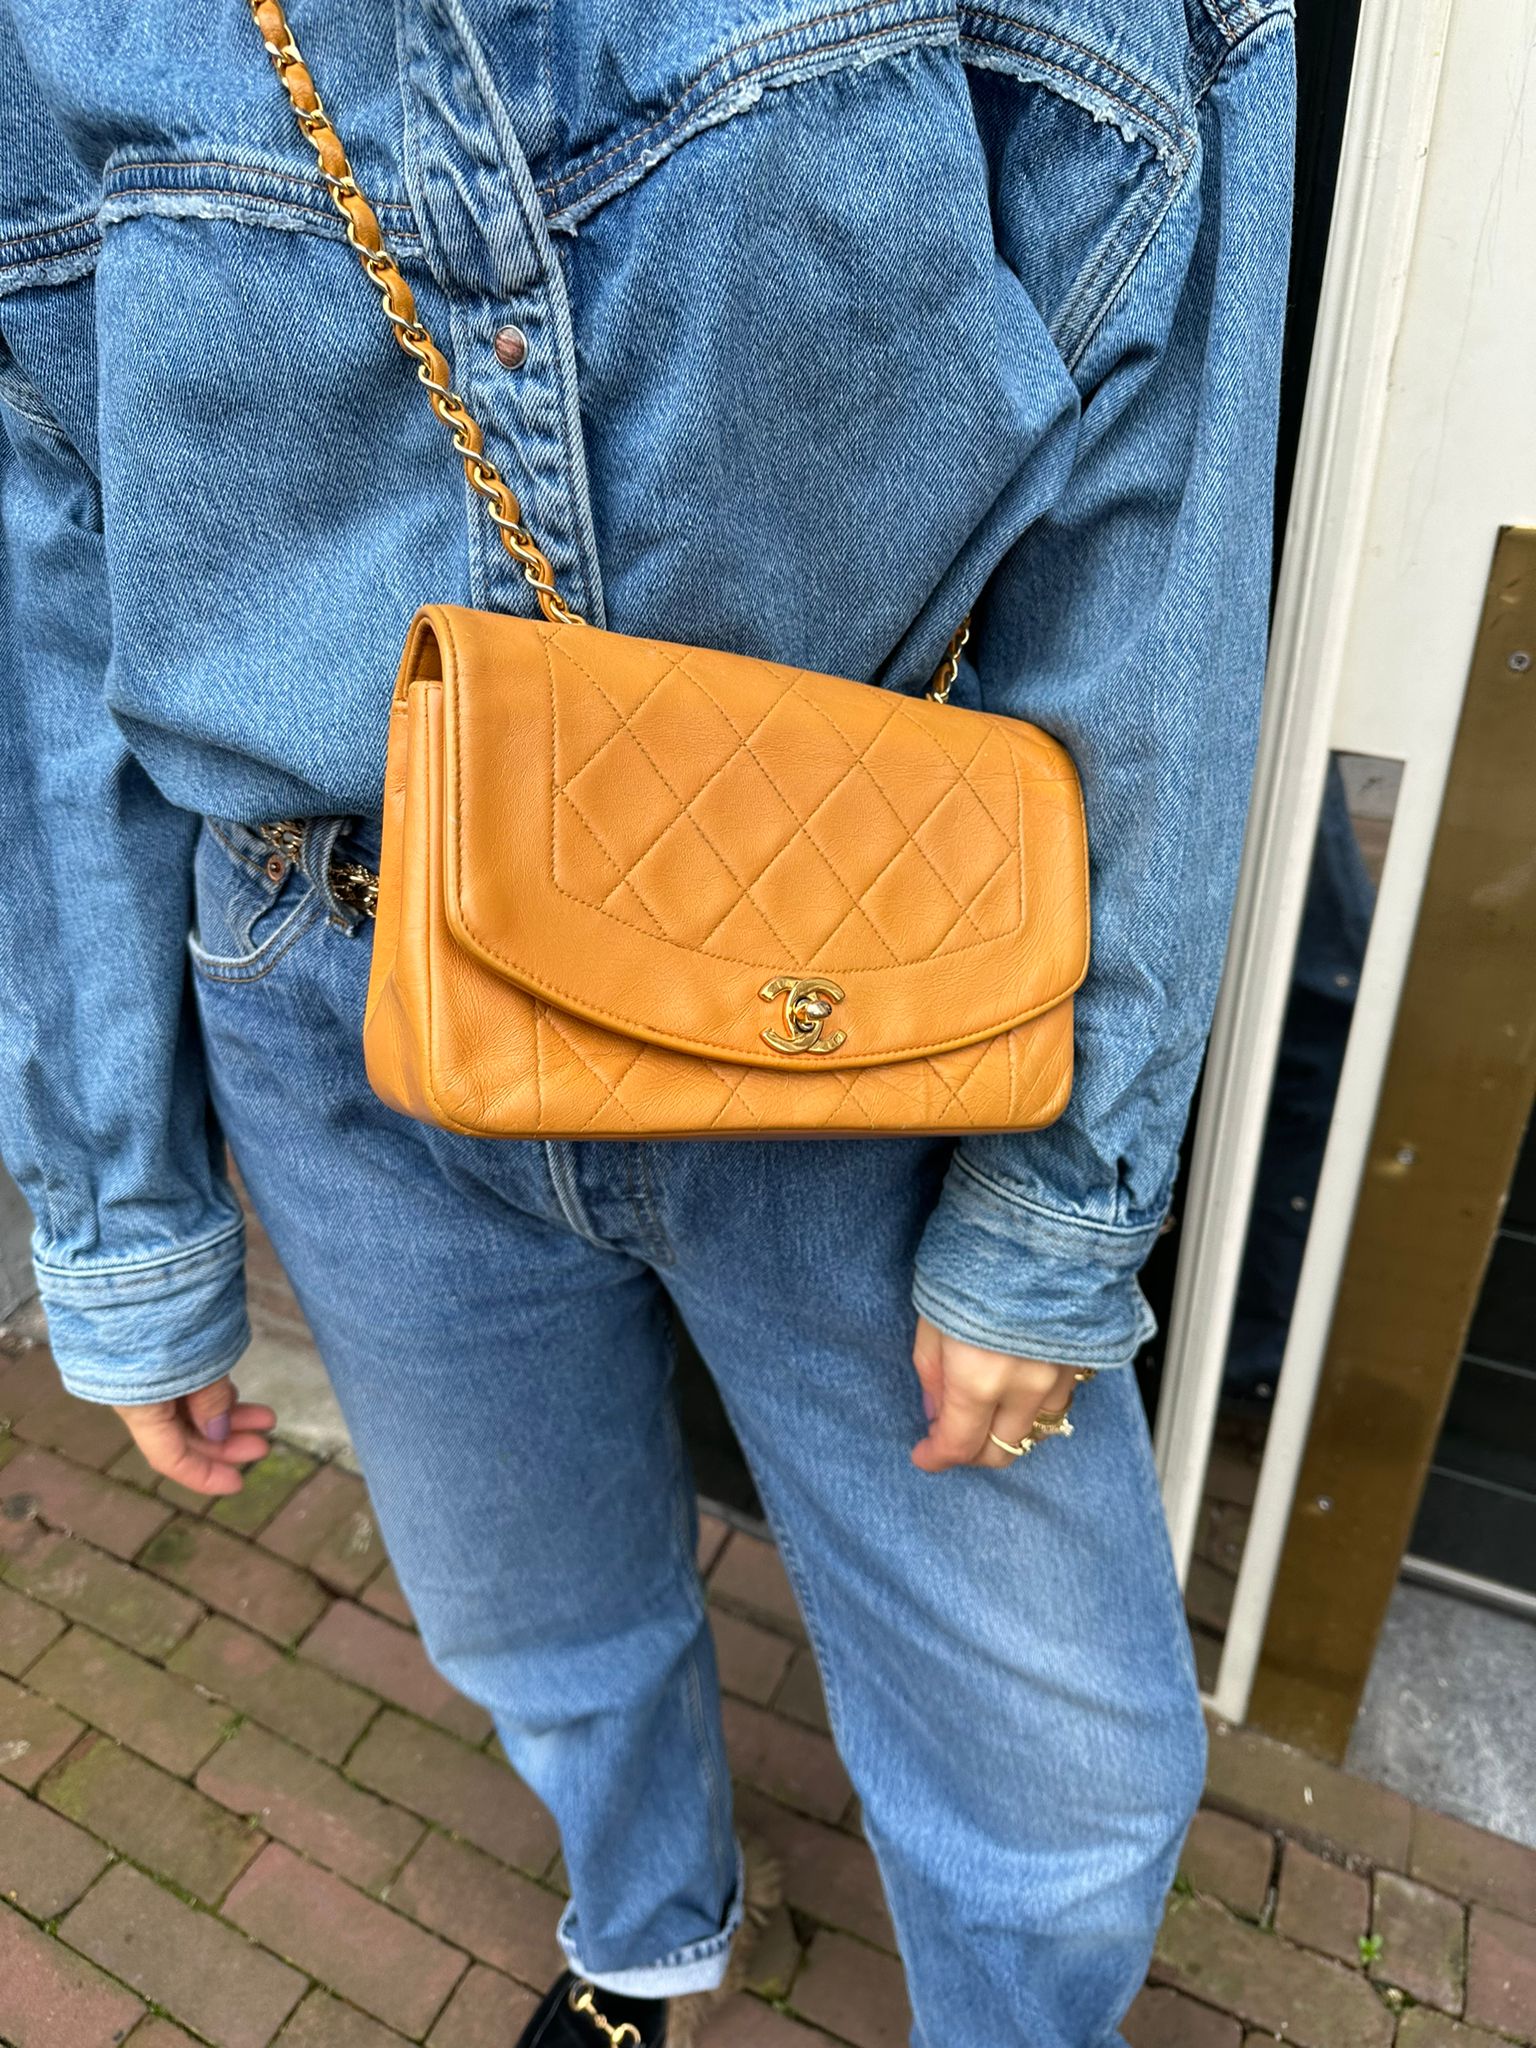 Vintage Diana – The High End Amsterdam